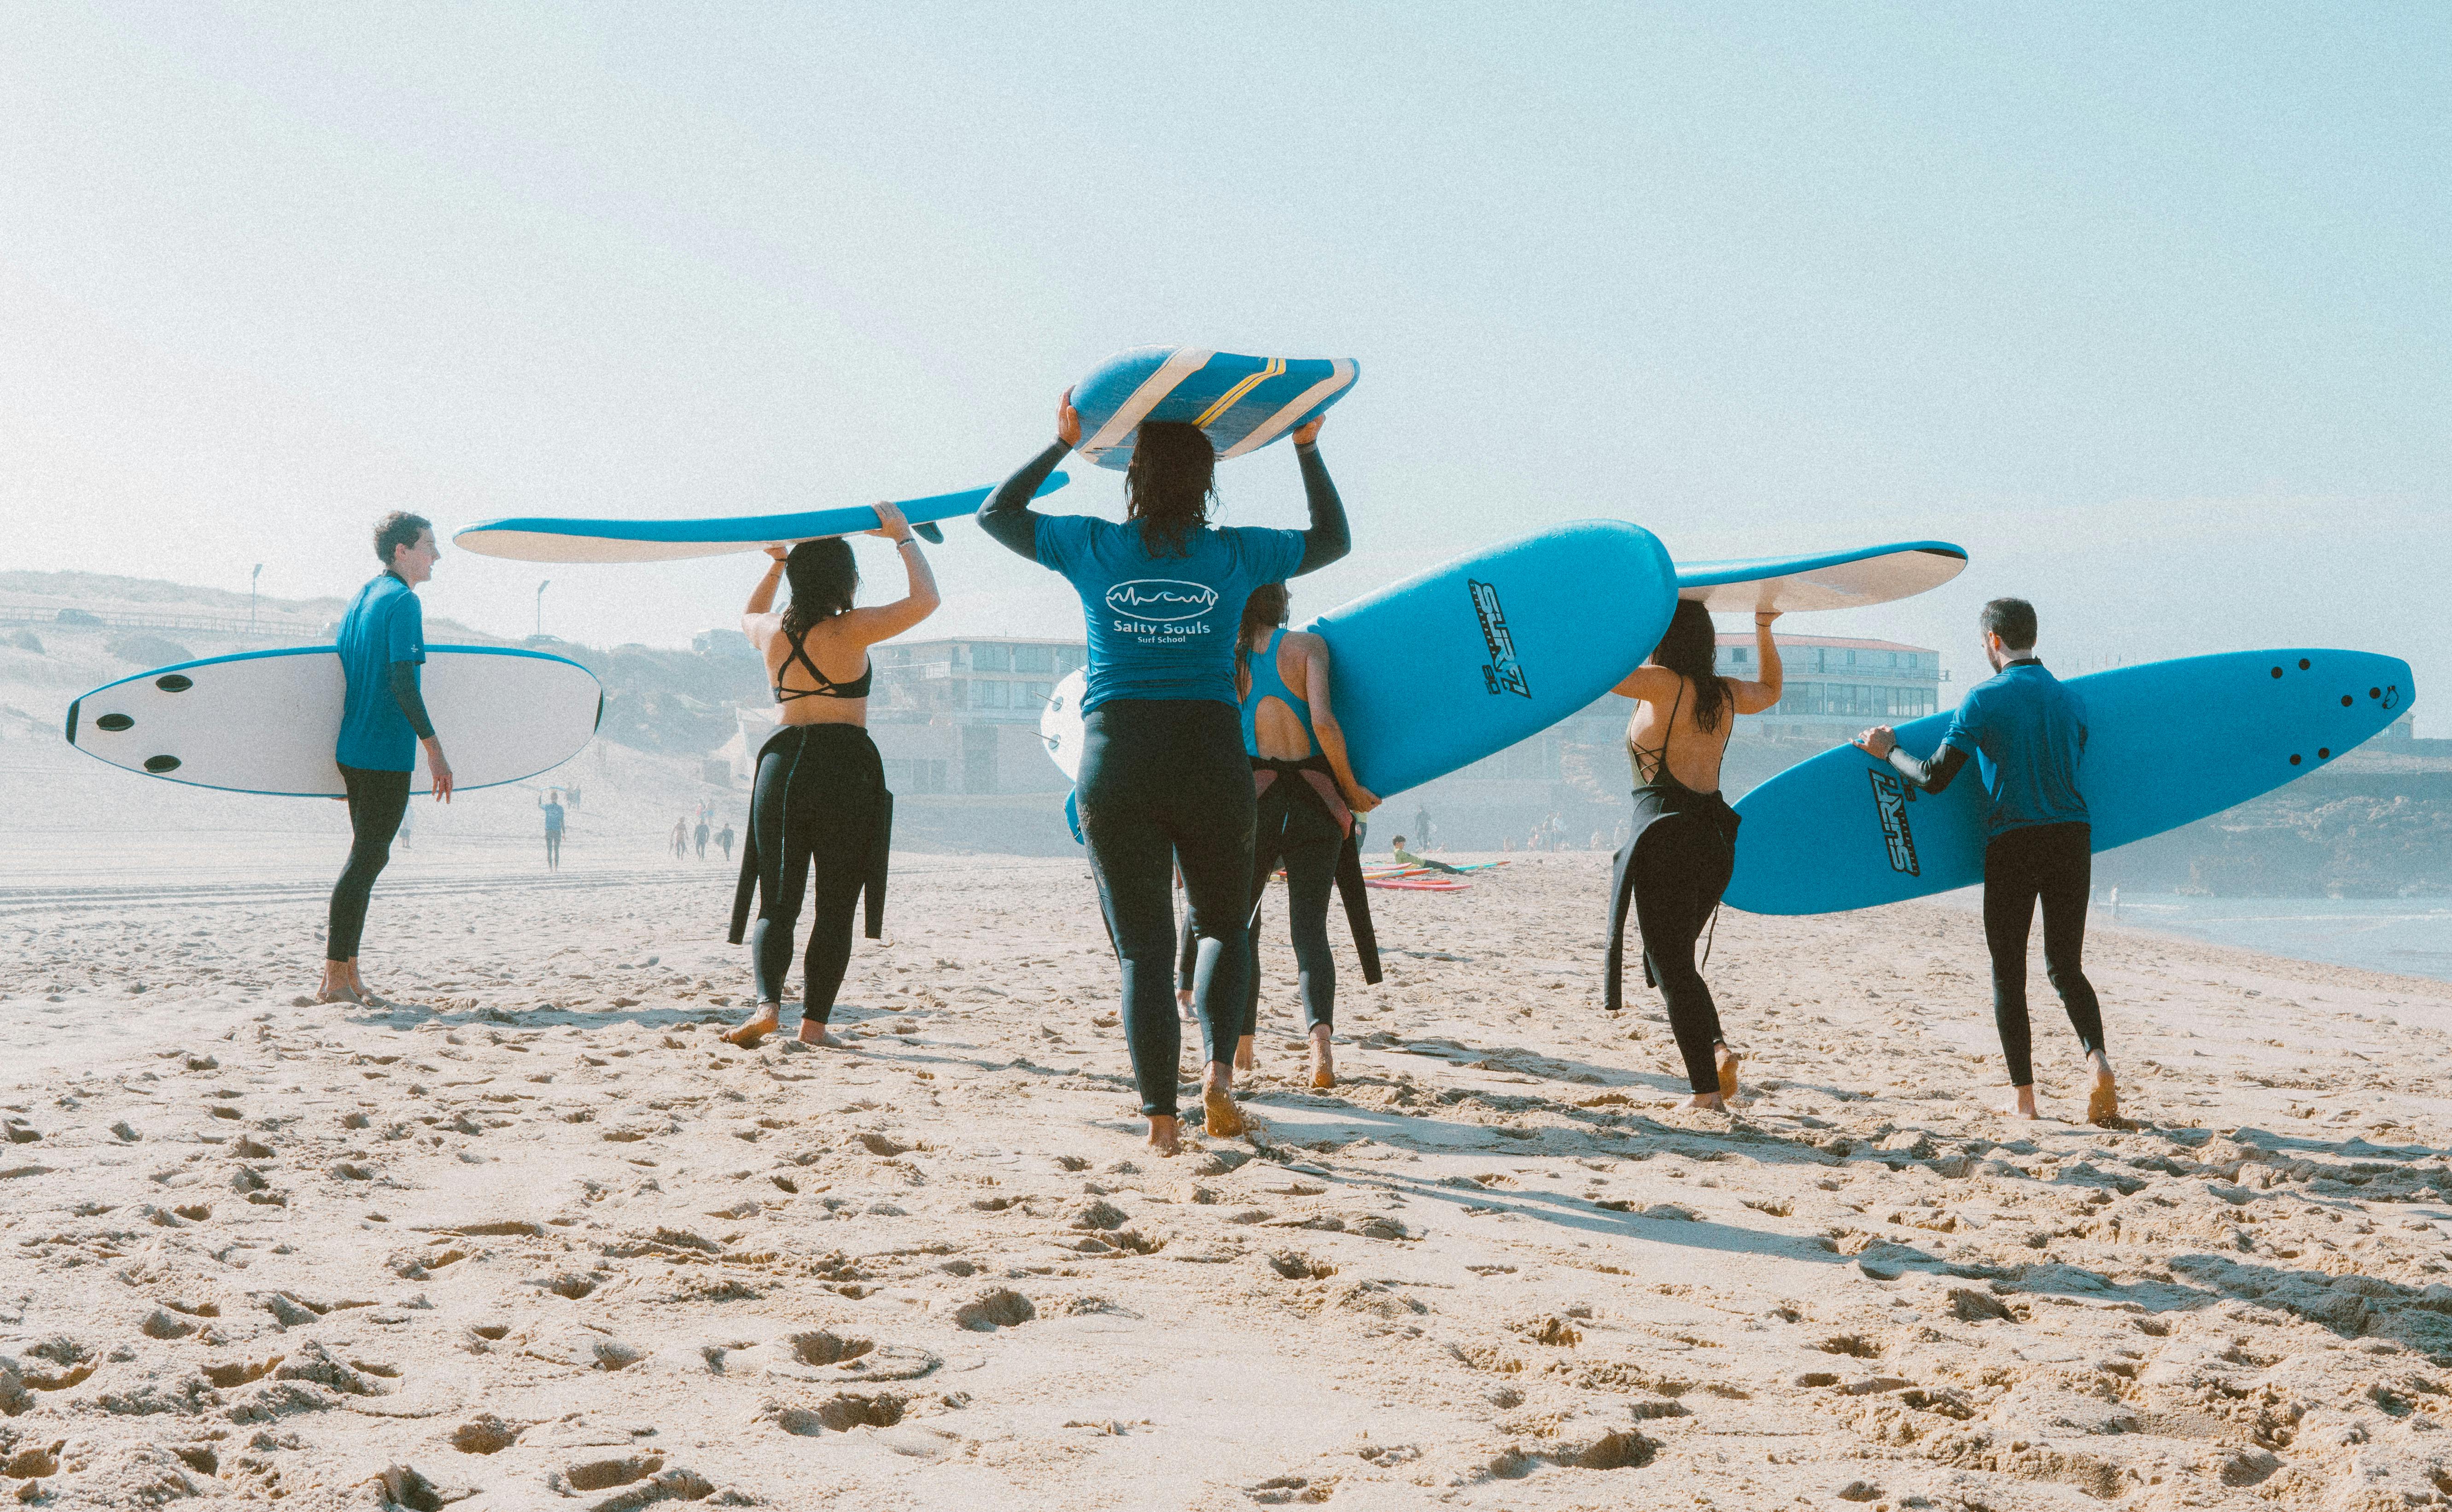 Group of people carrying surfboards. | Photo: Pexels